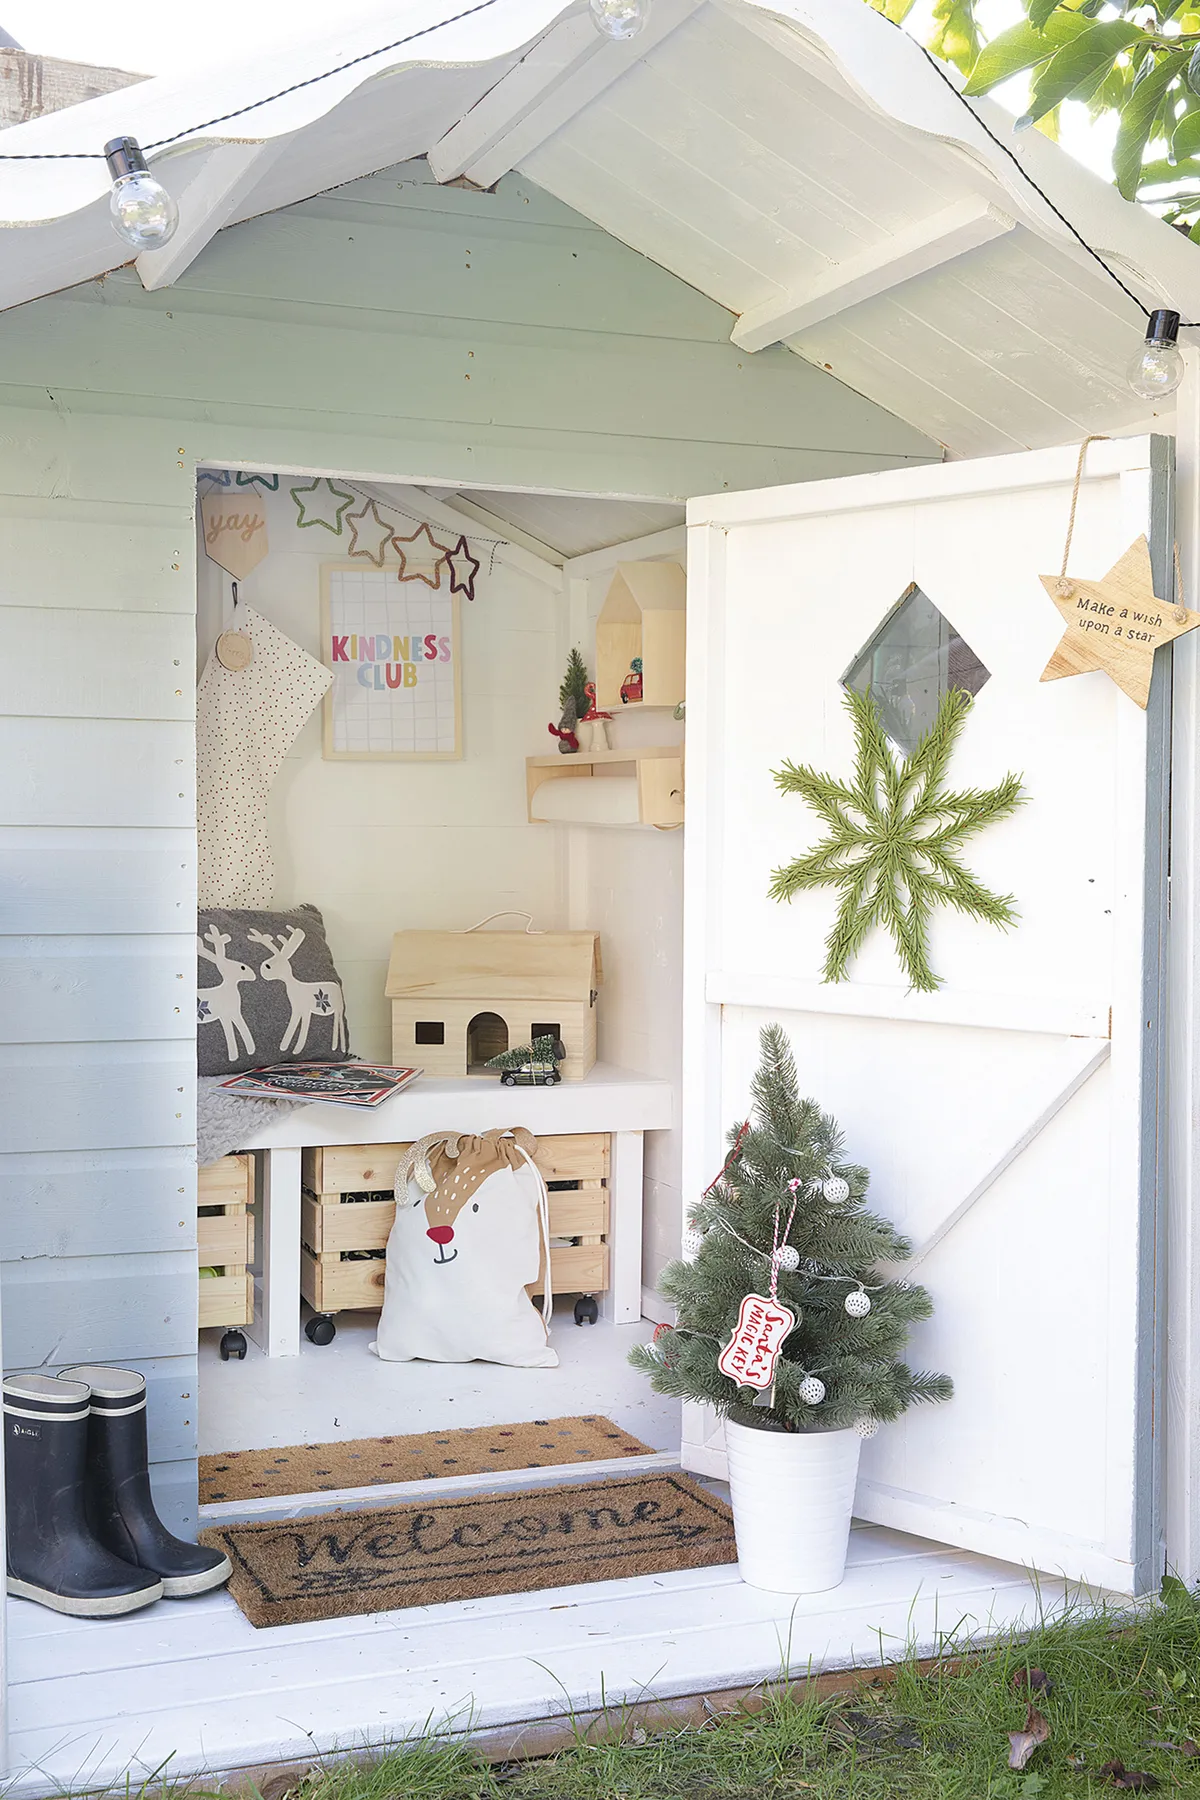 ‘Building this flat-pack playhouse was our lockdown project as a joint birthday present for the kids,’ Louise reveals. ‘The storage bench doubles up as a desk or seat, and underneath I added castors to IKEA crates. I love dressing it up to create a little grotto at Christmas.’ The Kindness Club print is from Etsy shop Minii and Maxii